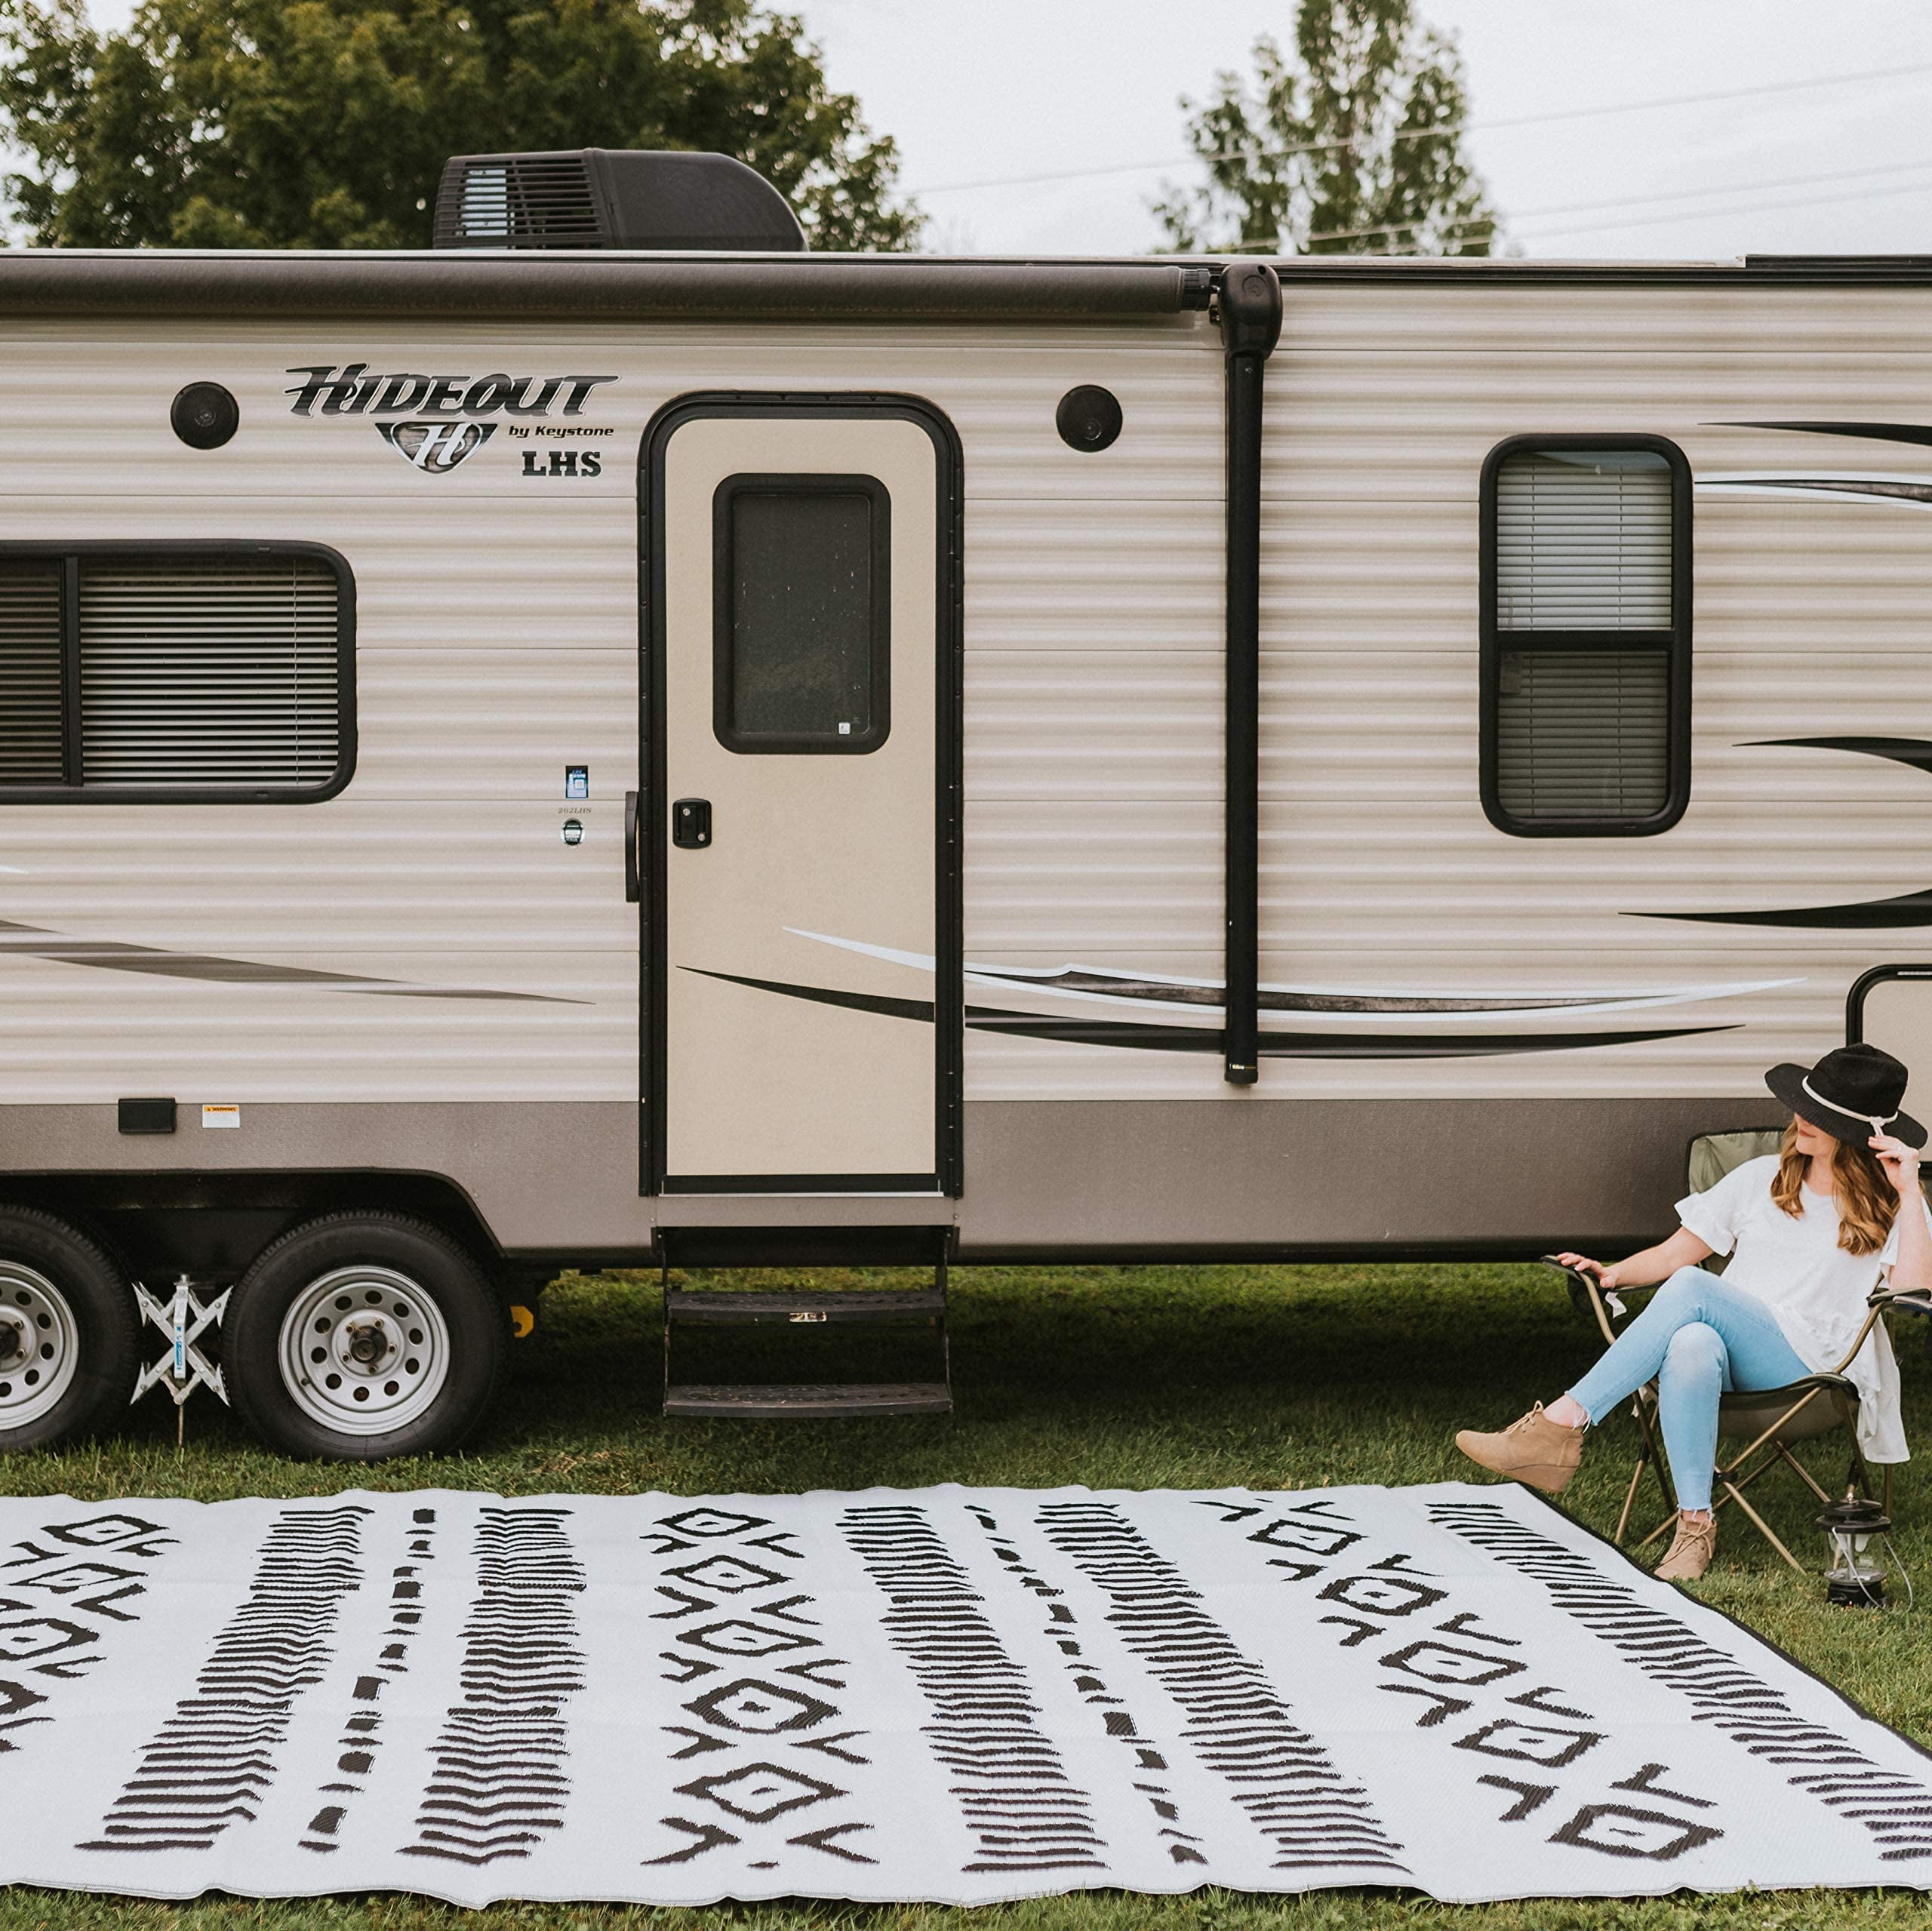 Glamplife Recycled Reversible Rv Rug Camping Rugs For Outside Your Mat 9x12 Black And White Tribal Large Outdoor Patios Or Awnings Waterproof